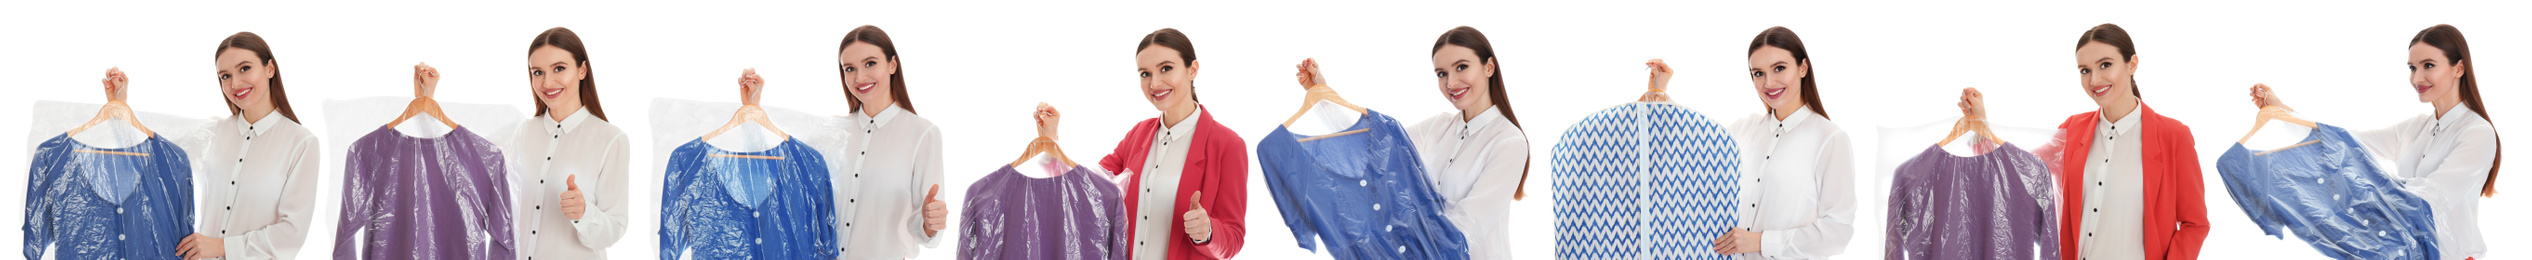 Collage of woman holding hanger with clothes on white background. Dry-cleaning service